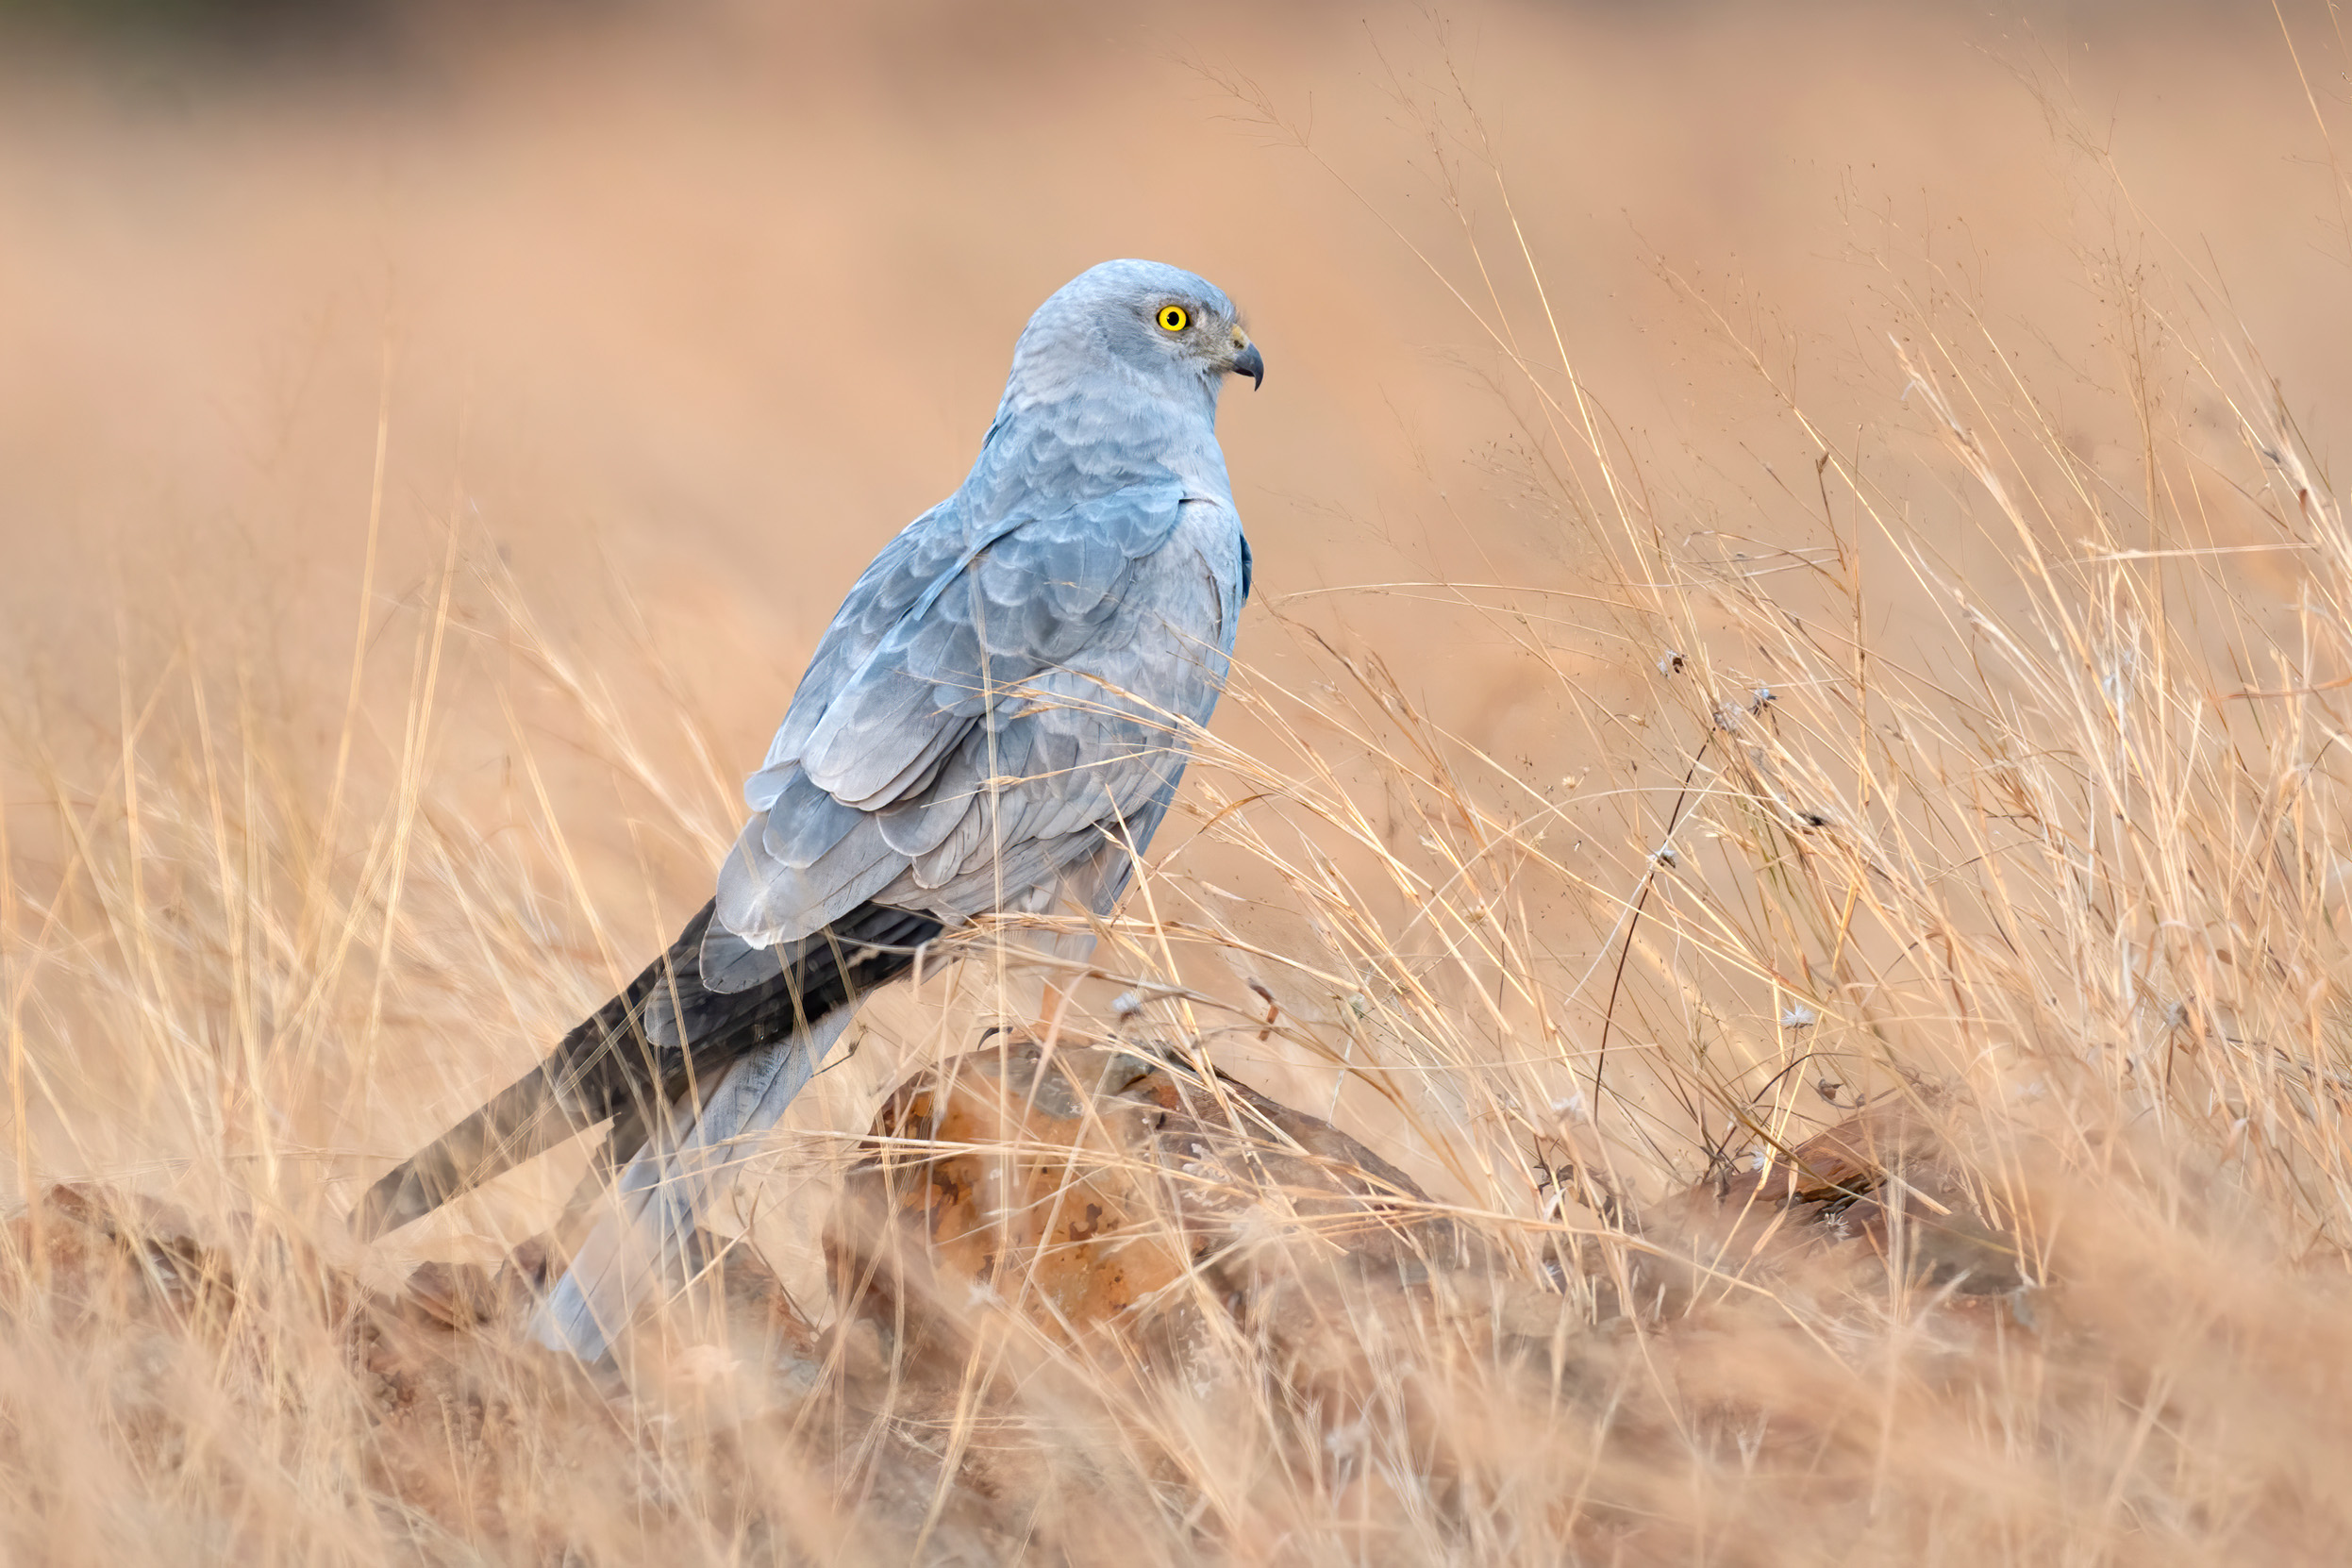 A male Montagu's Harrier perched on a rock in a brown grass field.